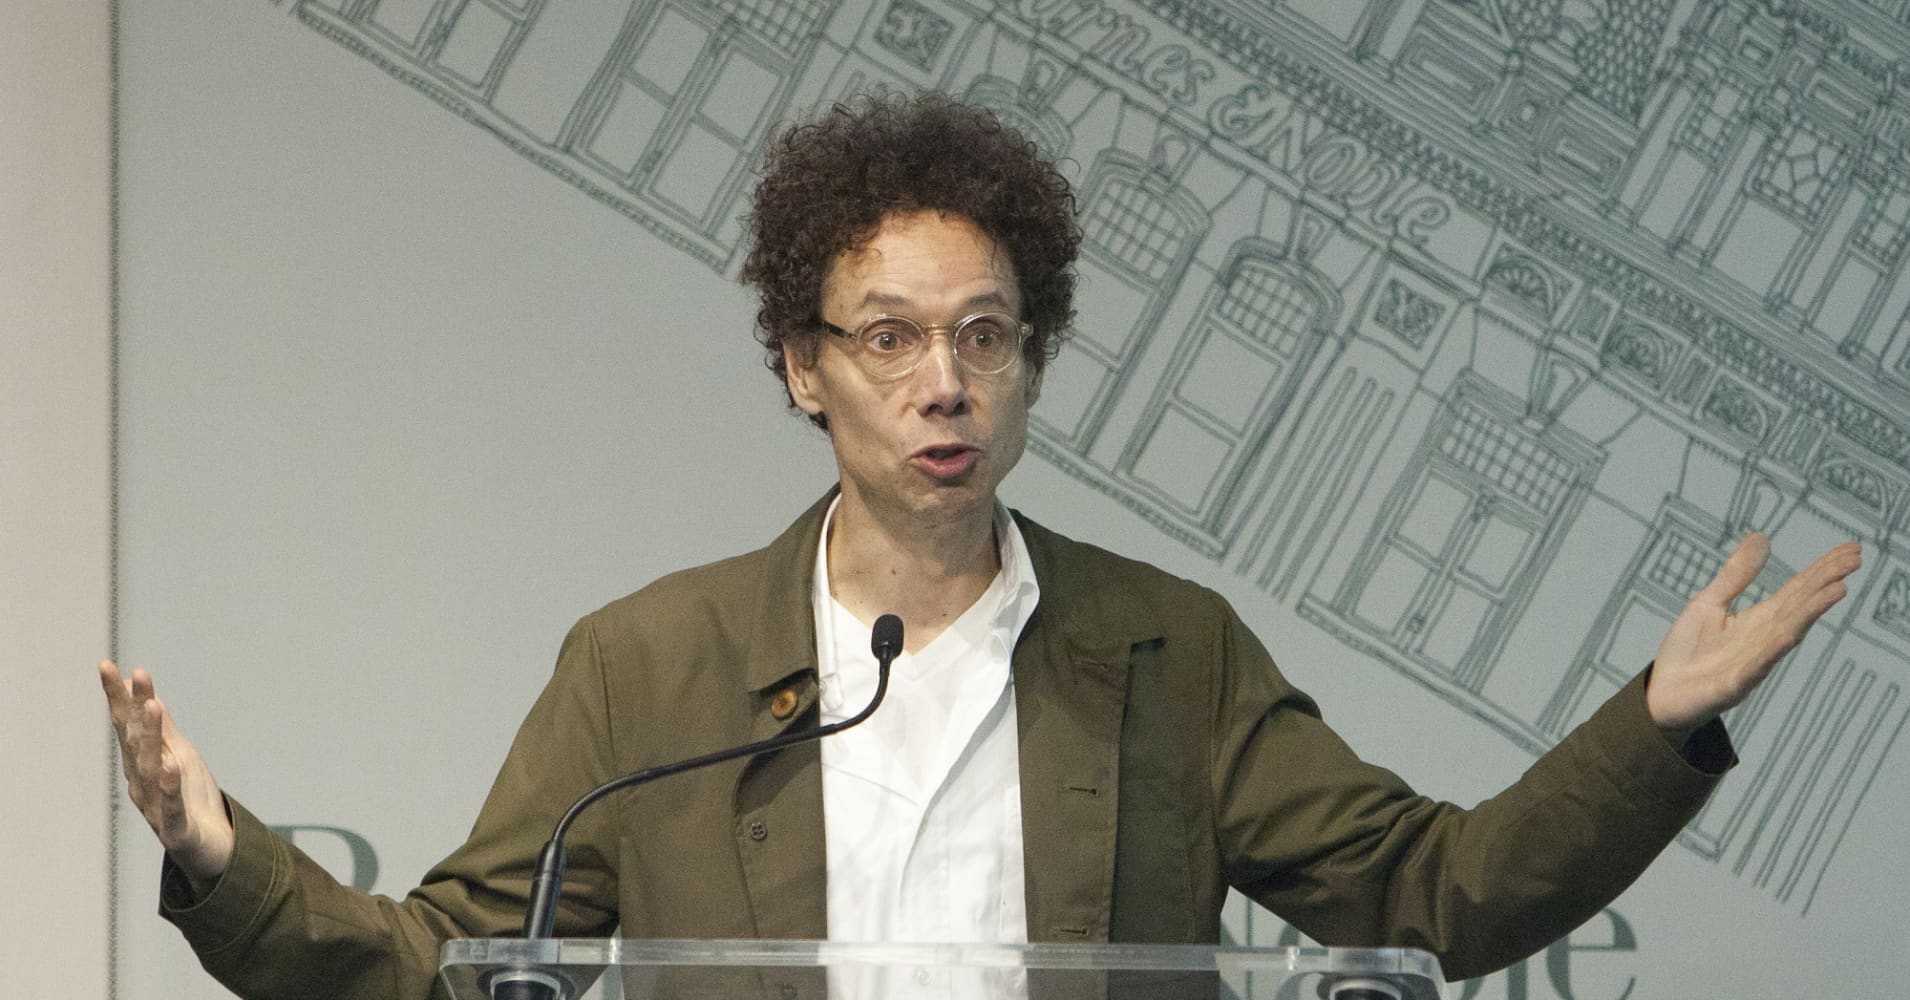 Malcolm Gladwell attends the 'David and Goliath' book signing at the Barnes and Noble Union Square in New York City